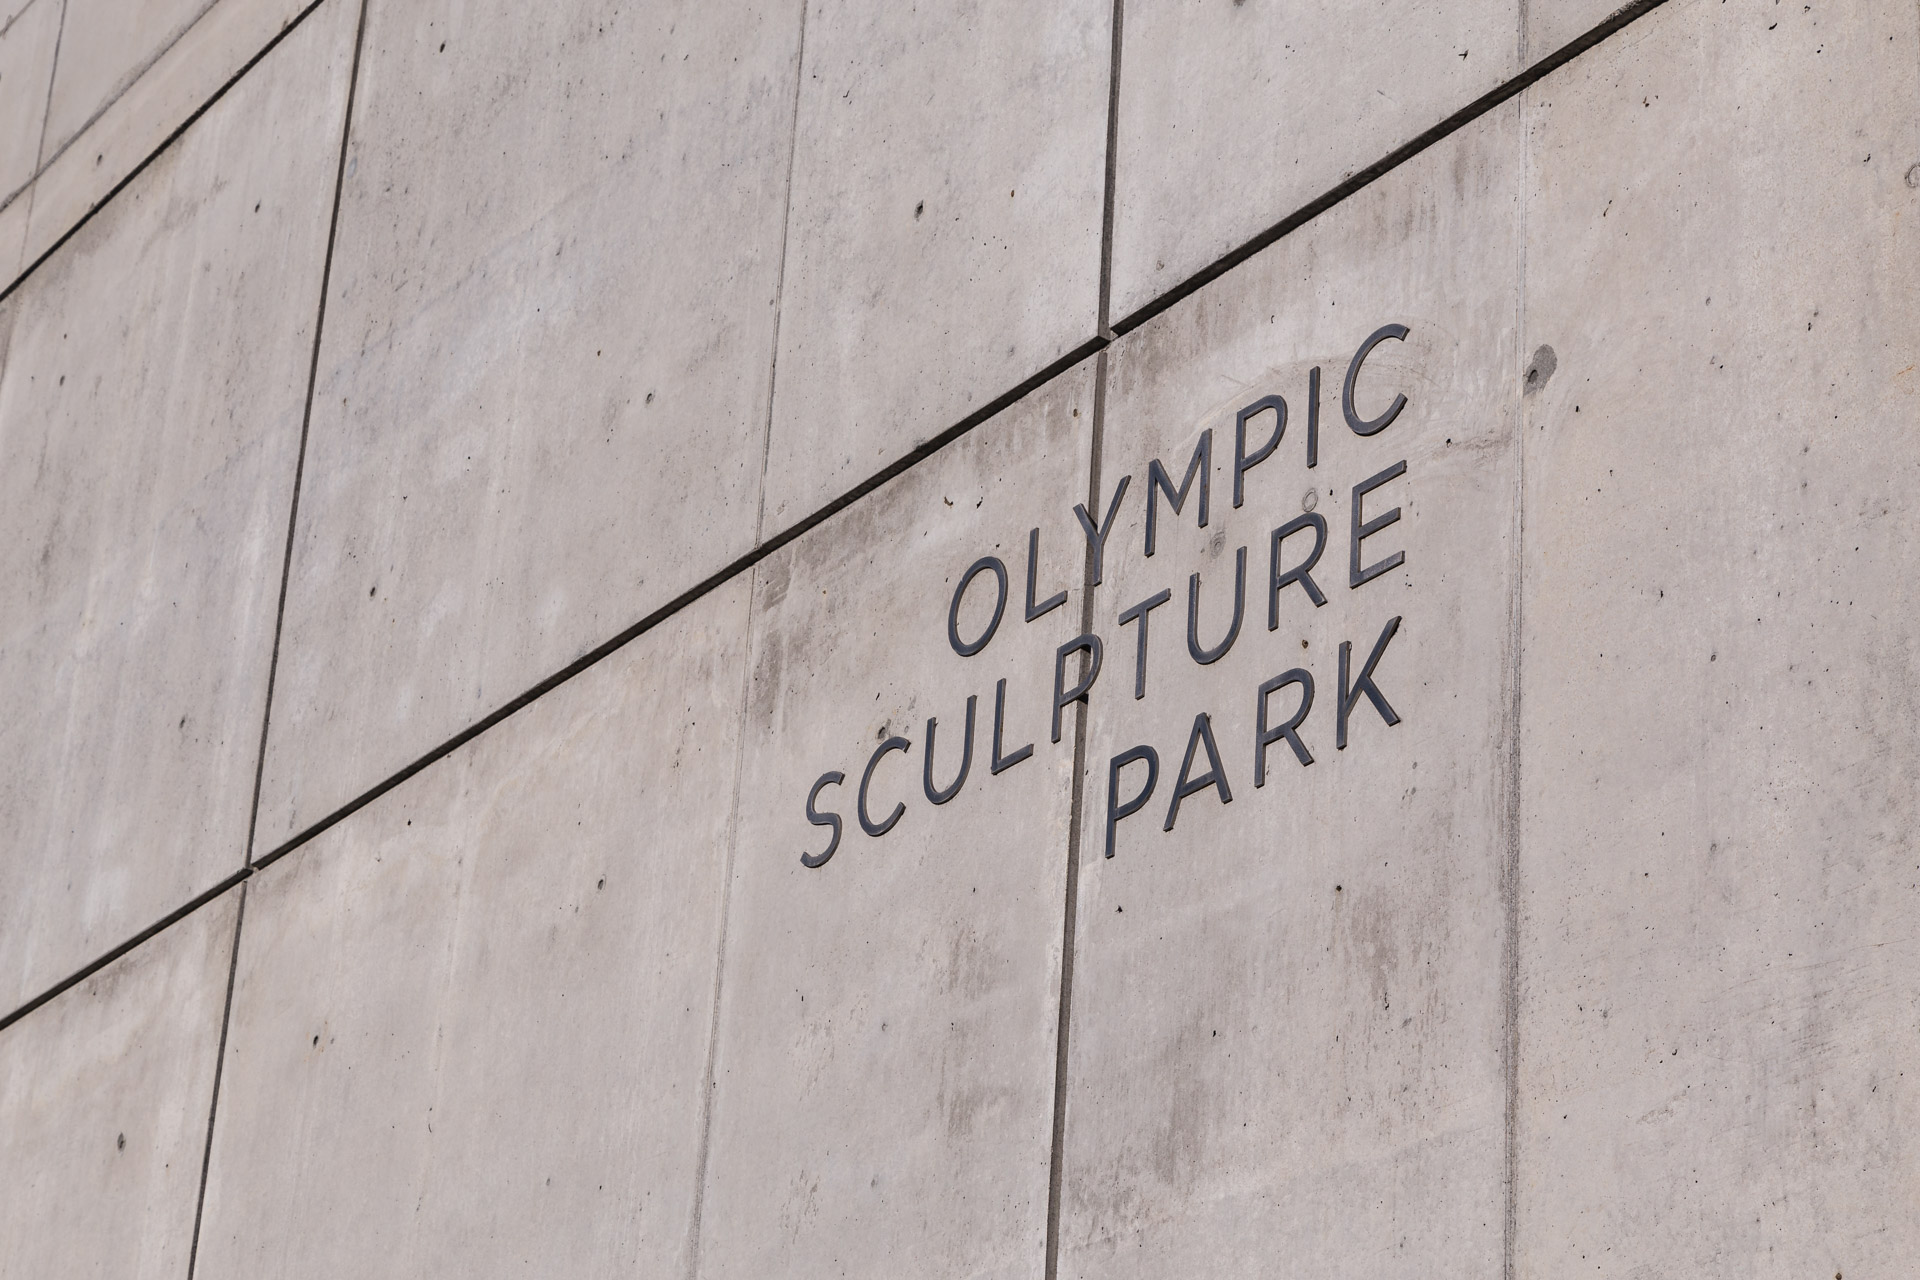 Olympic Sculpture Park (sign)